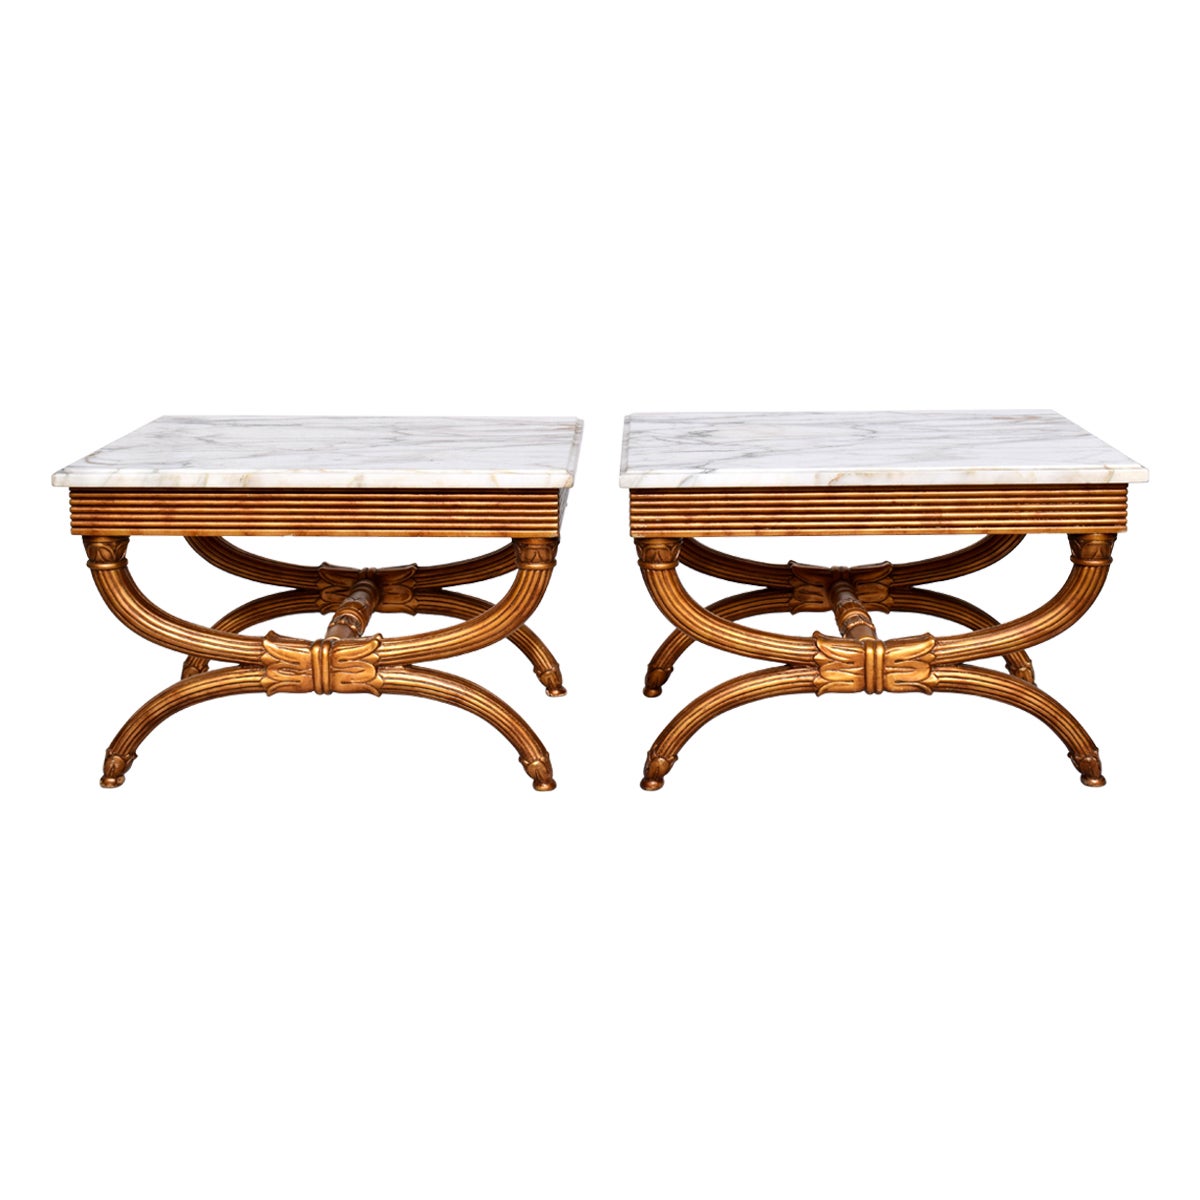 Neoclassical Style Curule Leg Marble Top Tables, Pair For Sale